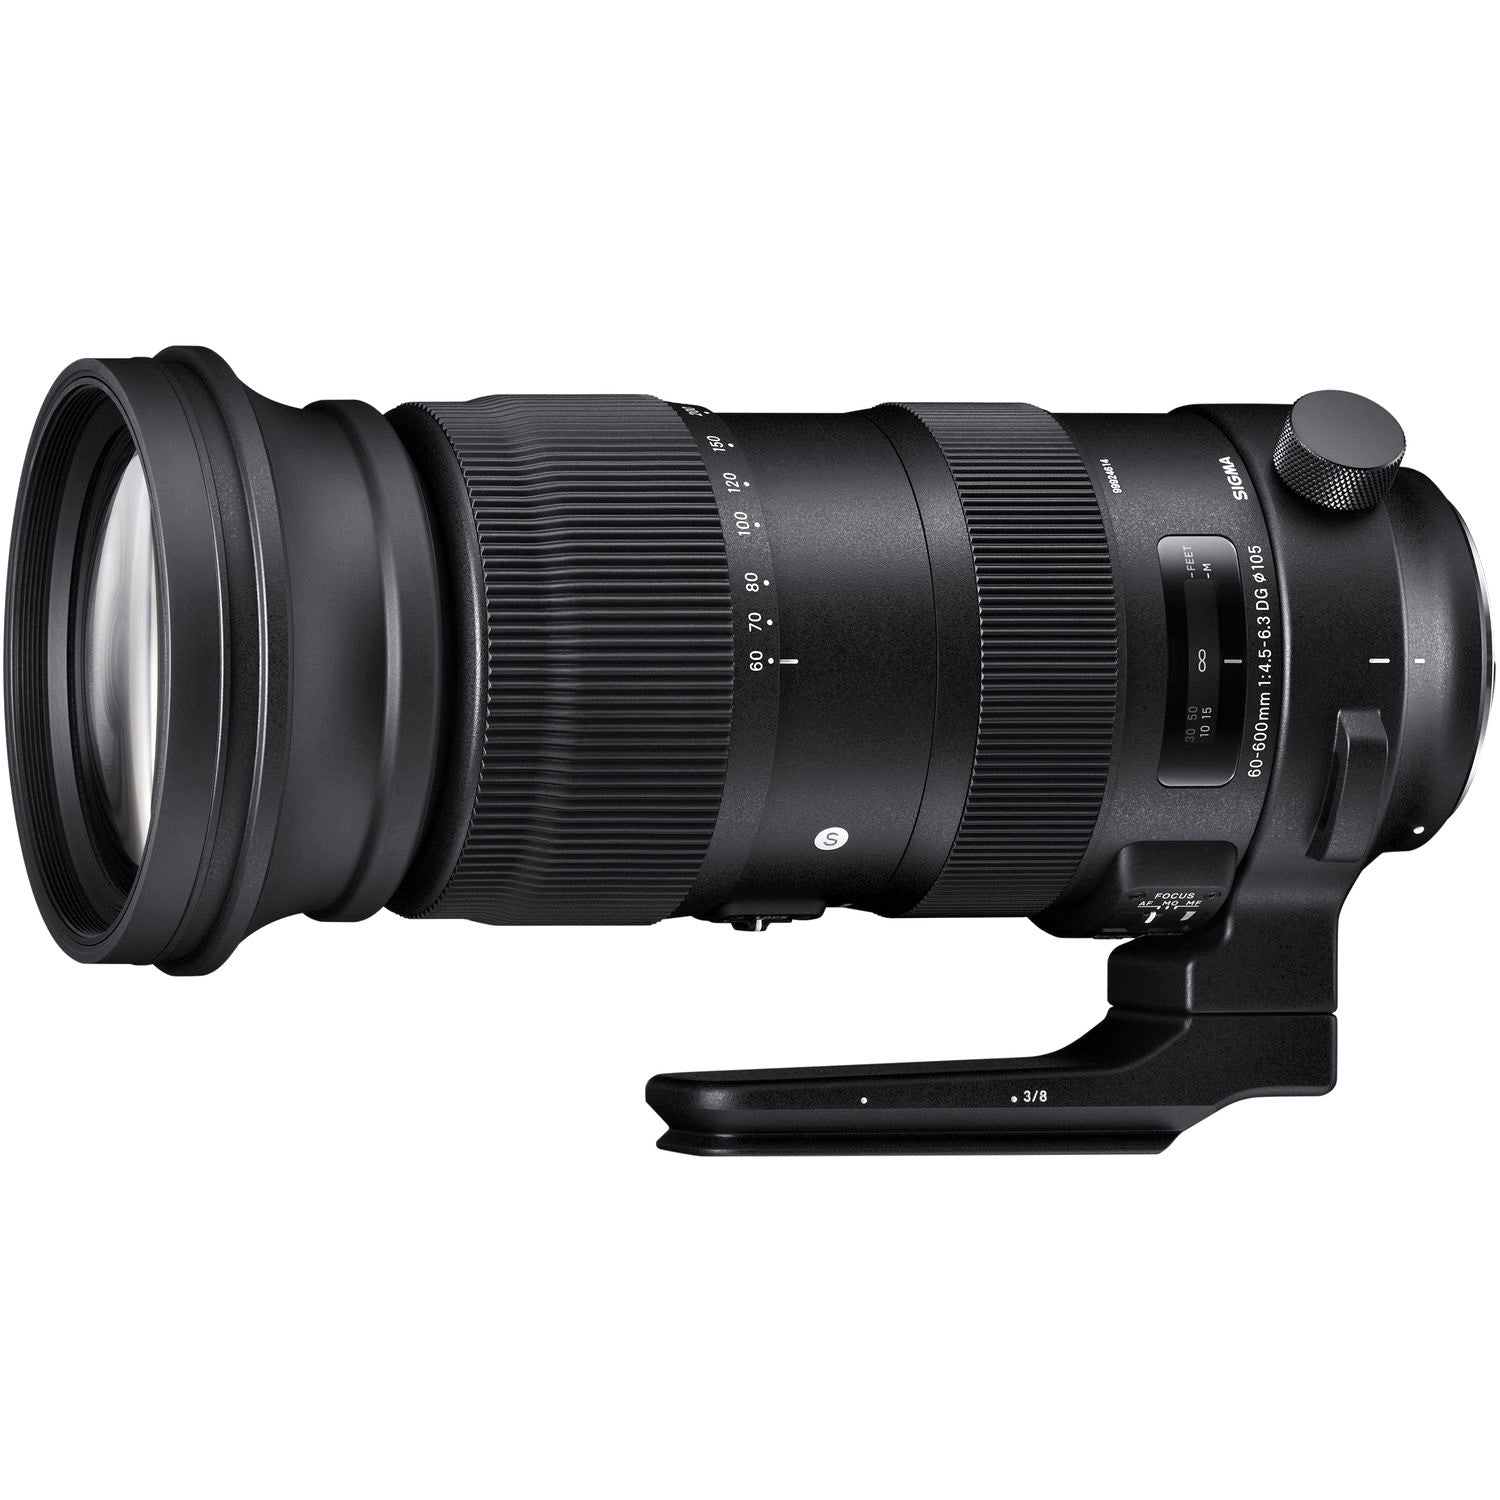 Sigma 60-600mm F4.5-6.3 DG OS HSM Sports Lens for Canon EF